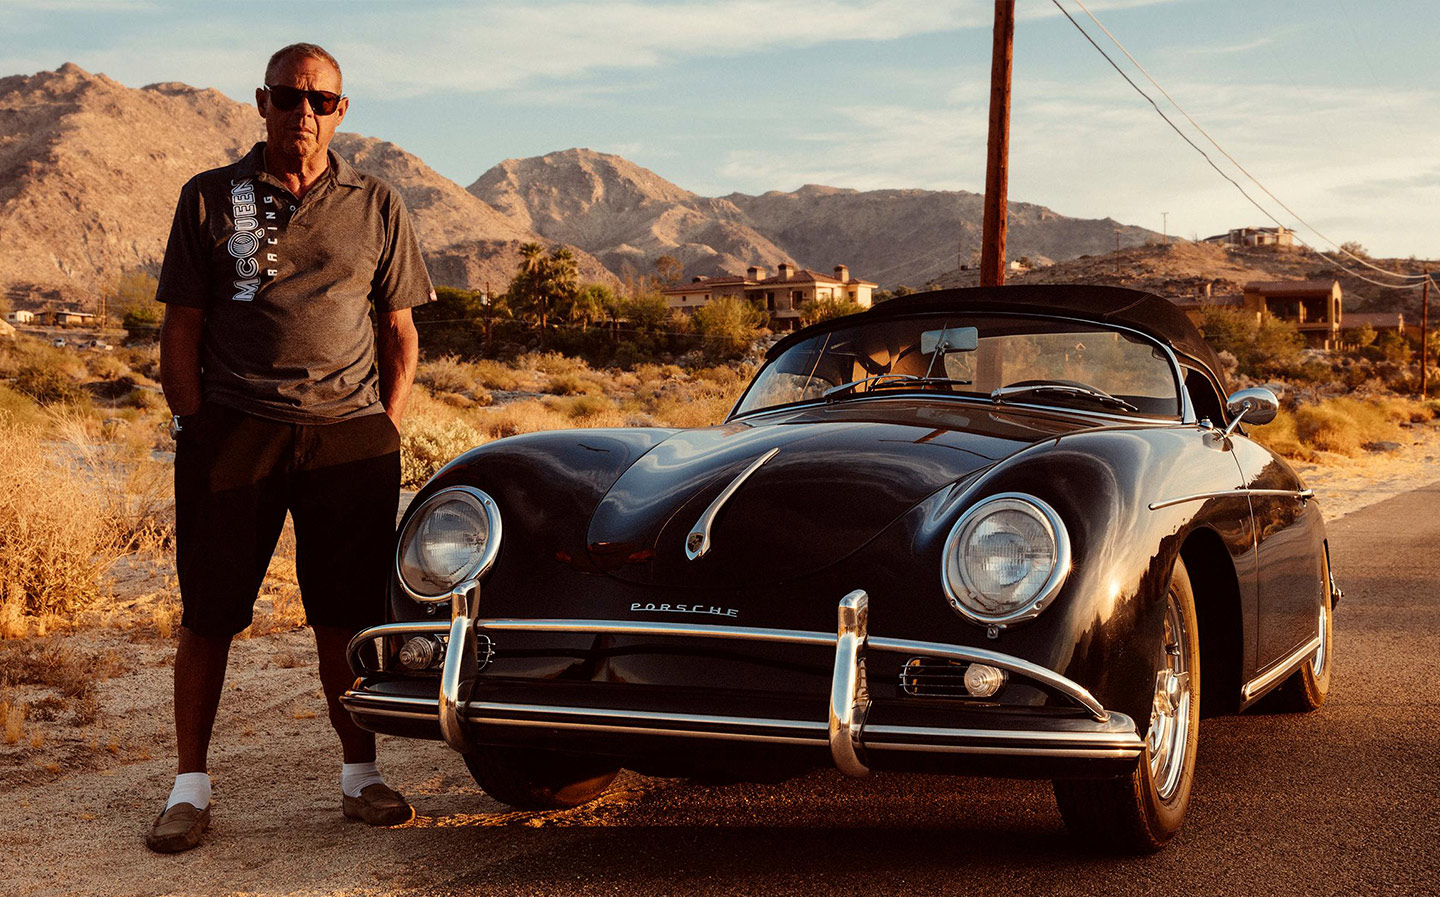 Me and My Motor: Chad McQueen, son of Steve McQueen, on catching the racing bug from his film star dad